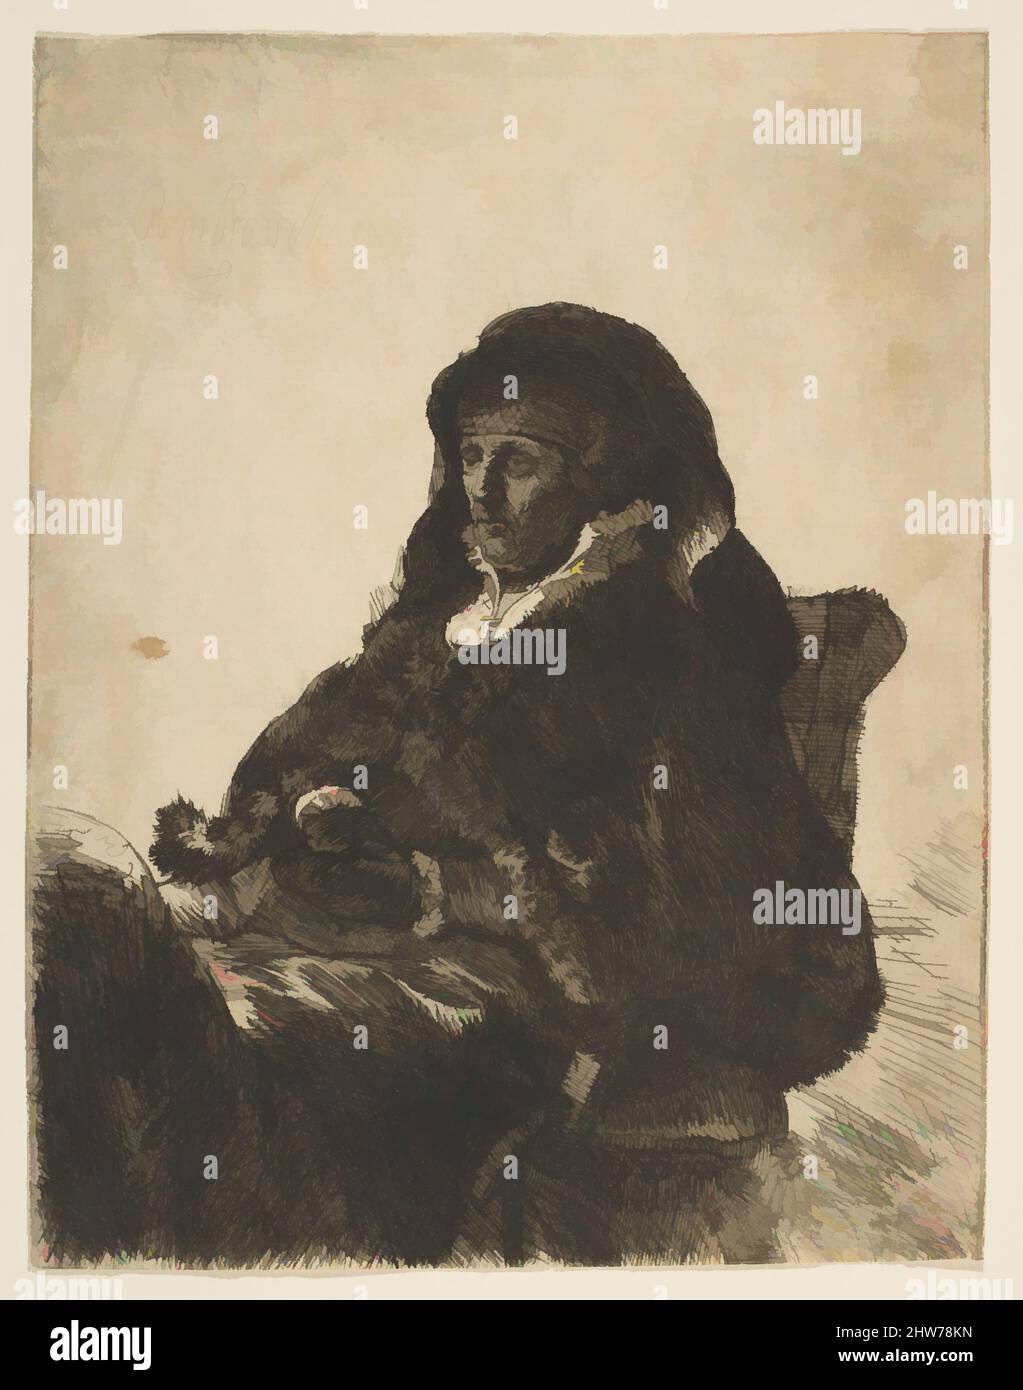 Art inspired by The Artist's Mother Seated at a Table, Looking Left: Three Quarter Length, after 1631, Etching, Sheet: 5 7/8 × 4 9/16 in. (14.9 × 11.6 cm), Prints, After Rembrandt (Rembrandt van Rijn) (Dutch, Leiden 1606–1669 Amsterdam, Classic works modernized by Artotop with a splash of modernity. Shapes, color and value, eye-catching visual impact on art. Emotions through freedom of artworks in a contemporary way. A timeless message pursuing a wildly creative new direction. Artists turning to the digital medium and creating the Artotop NFT Stock Photo